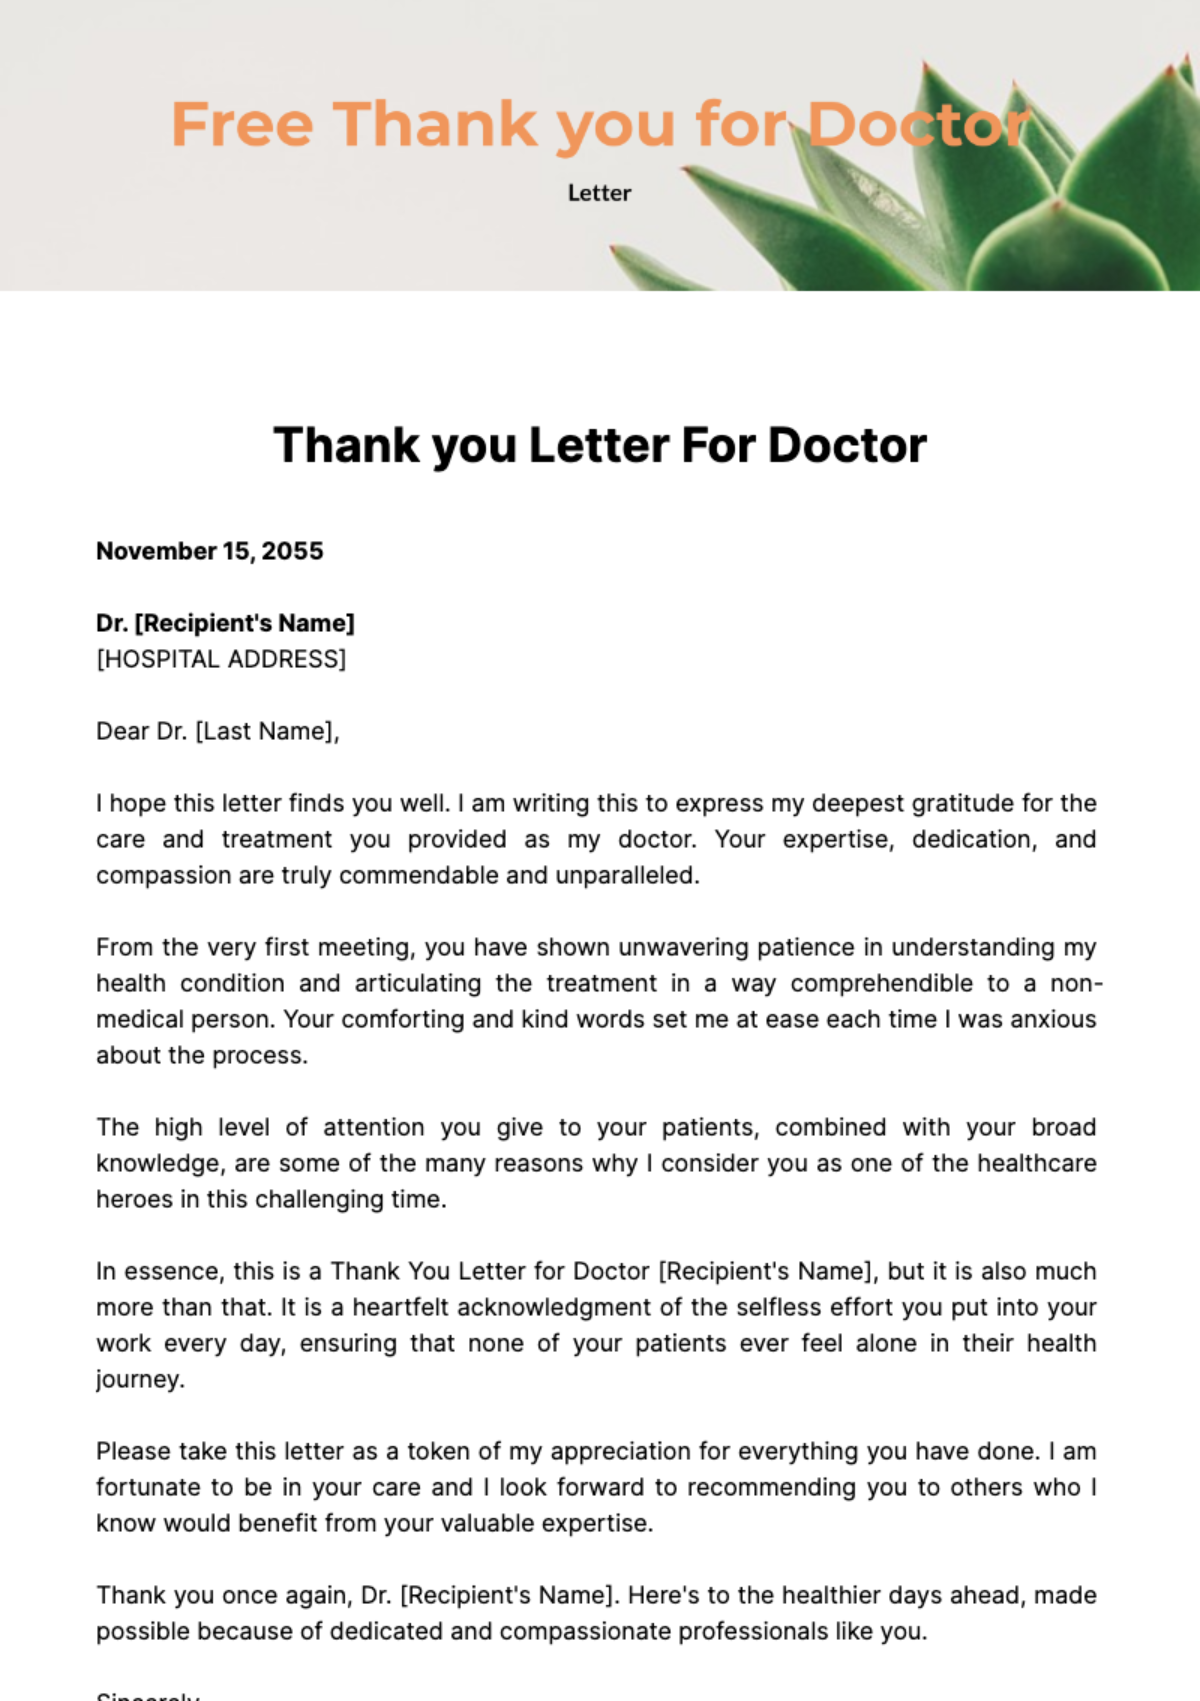 Thank you Letter for Doctor Template